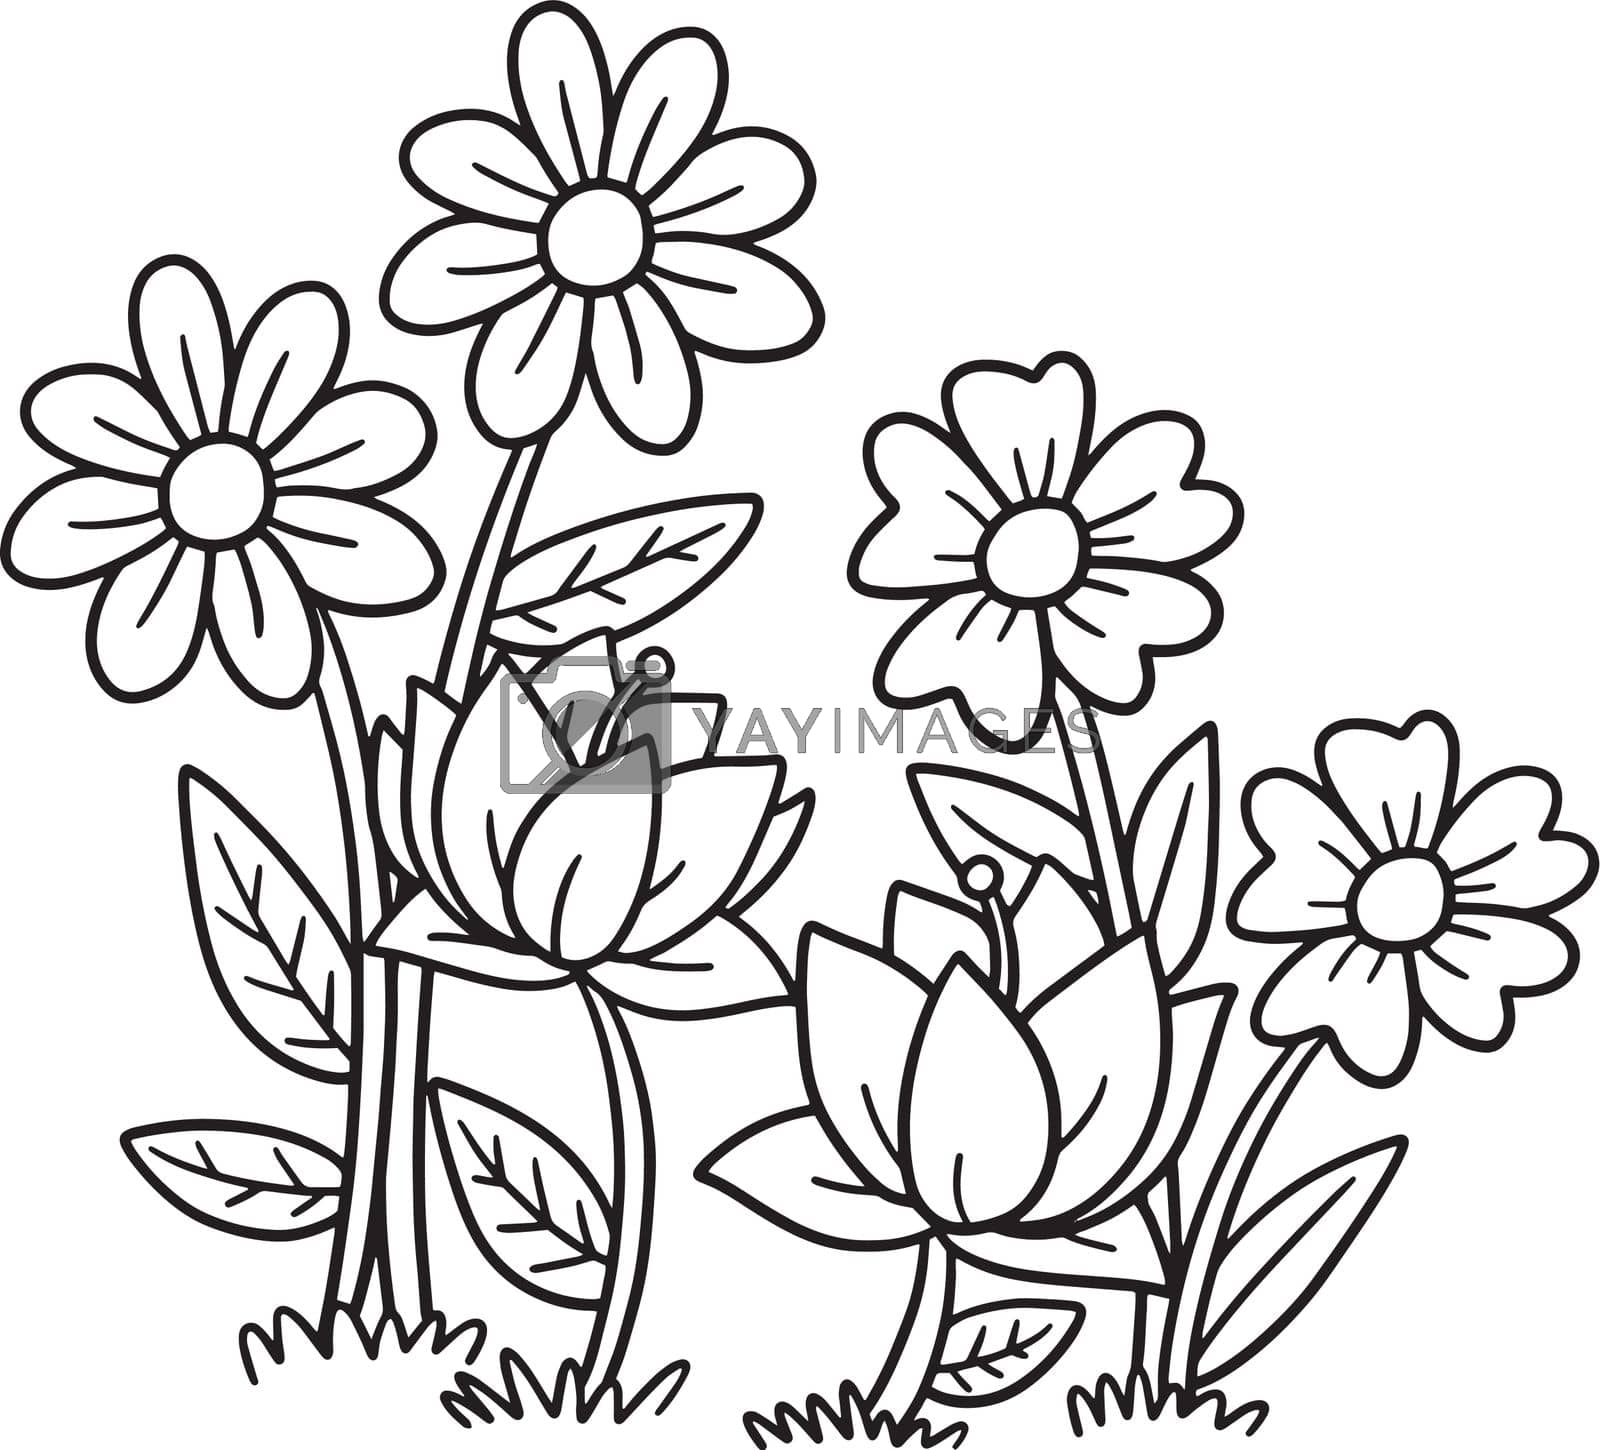 Royalty free image of Spring Flower Isolated Coloring Page for Kids by abbydesign